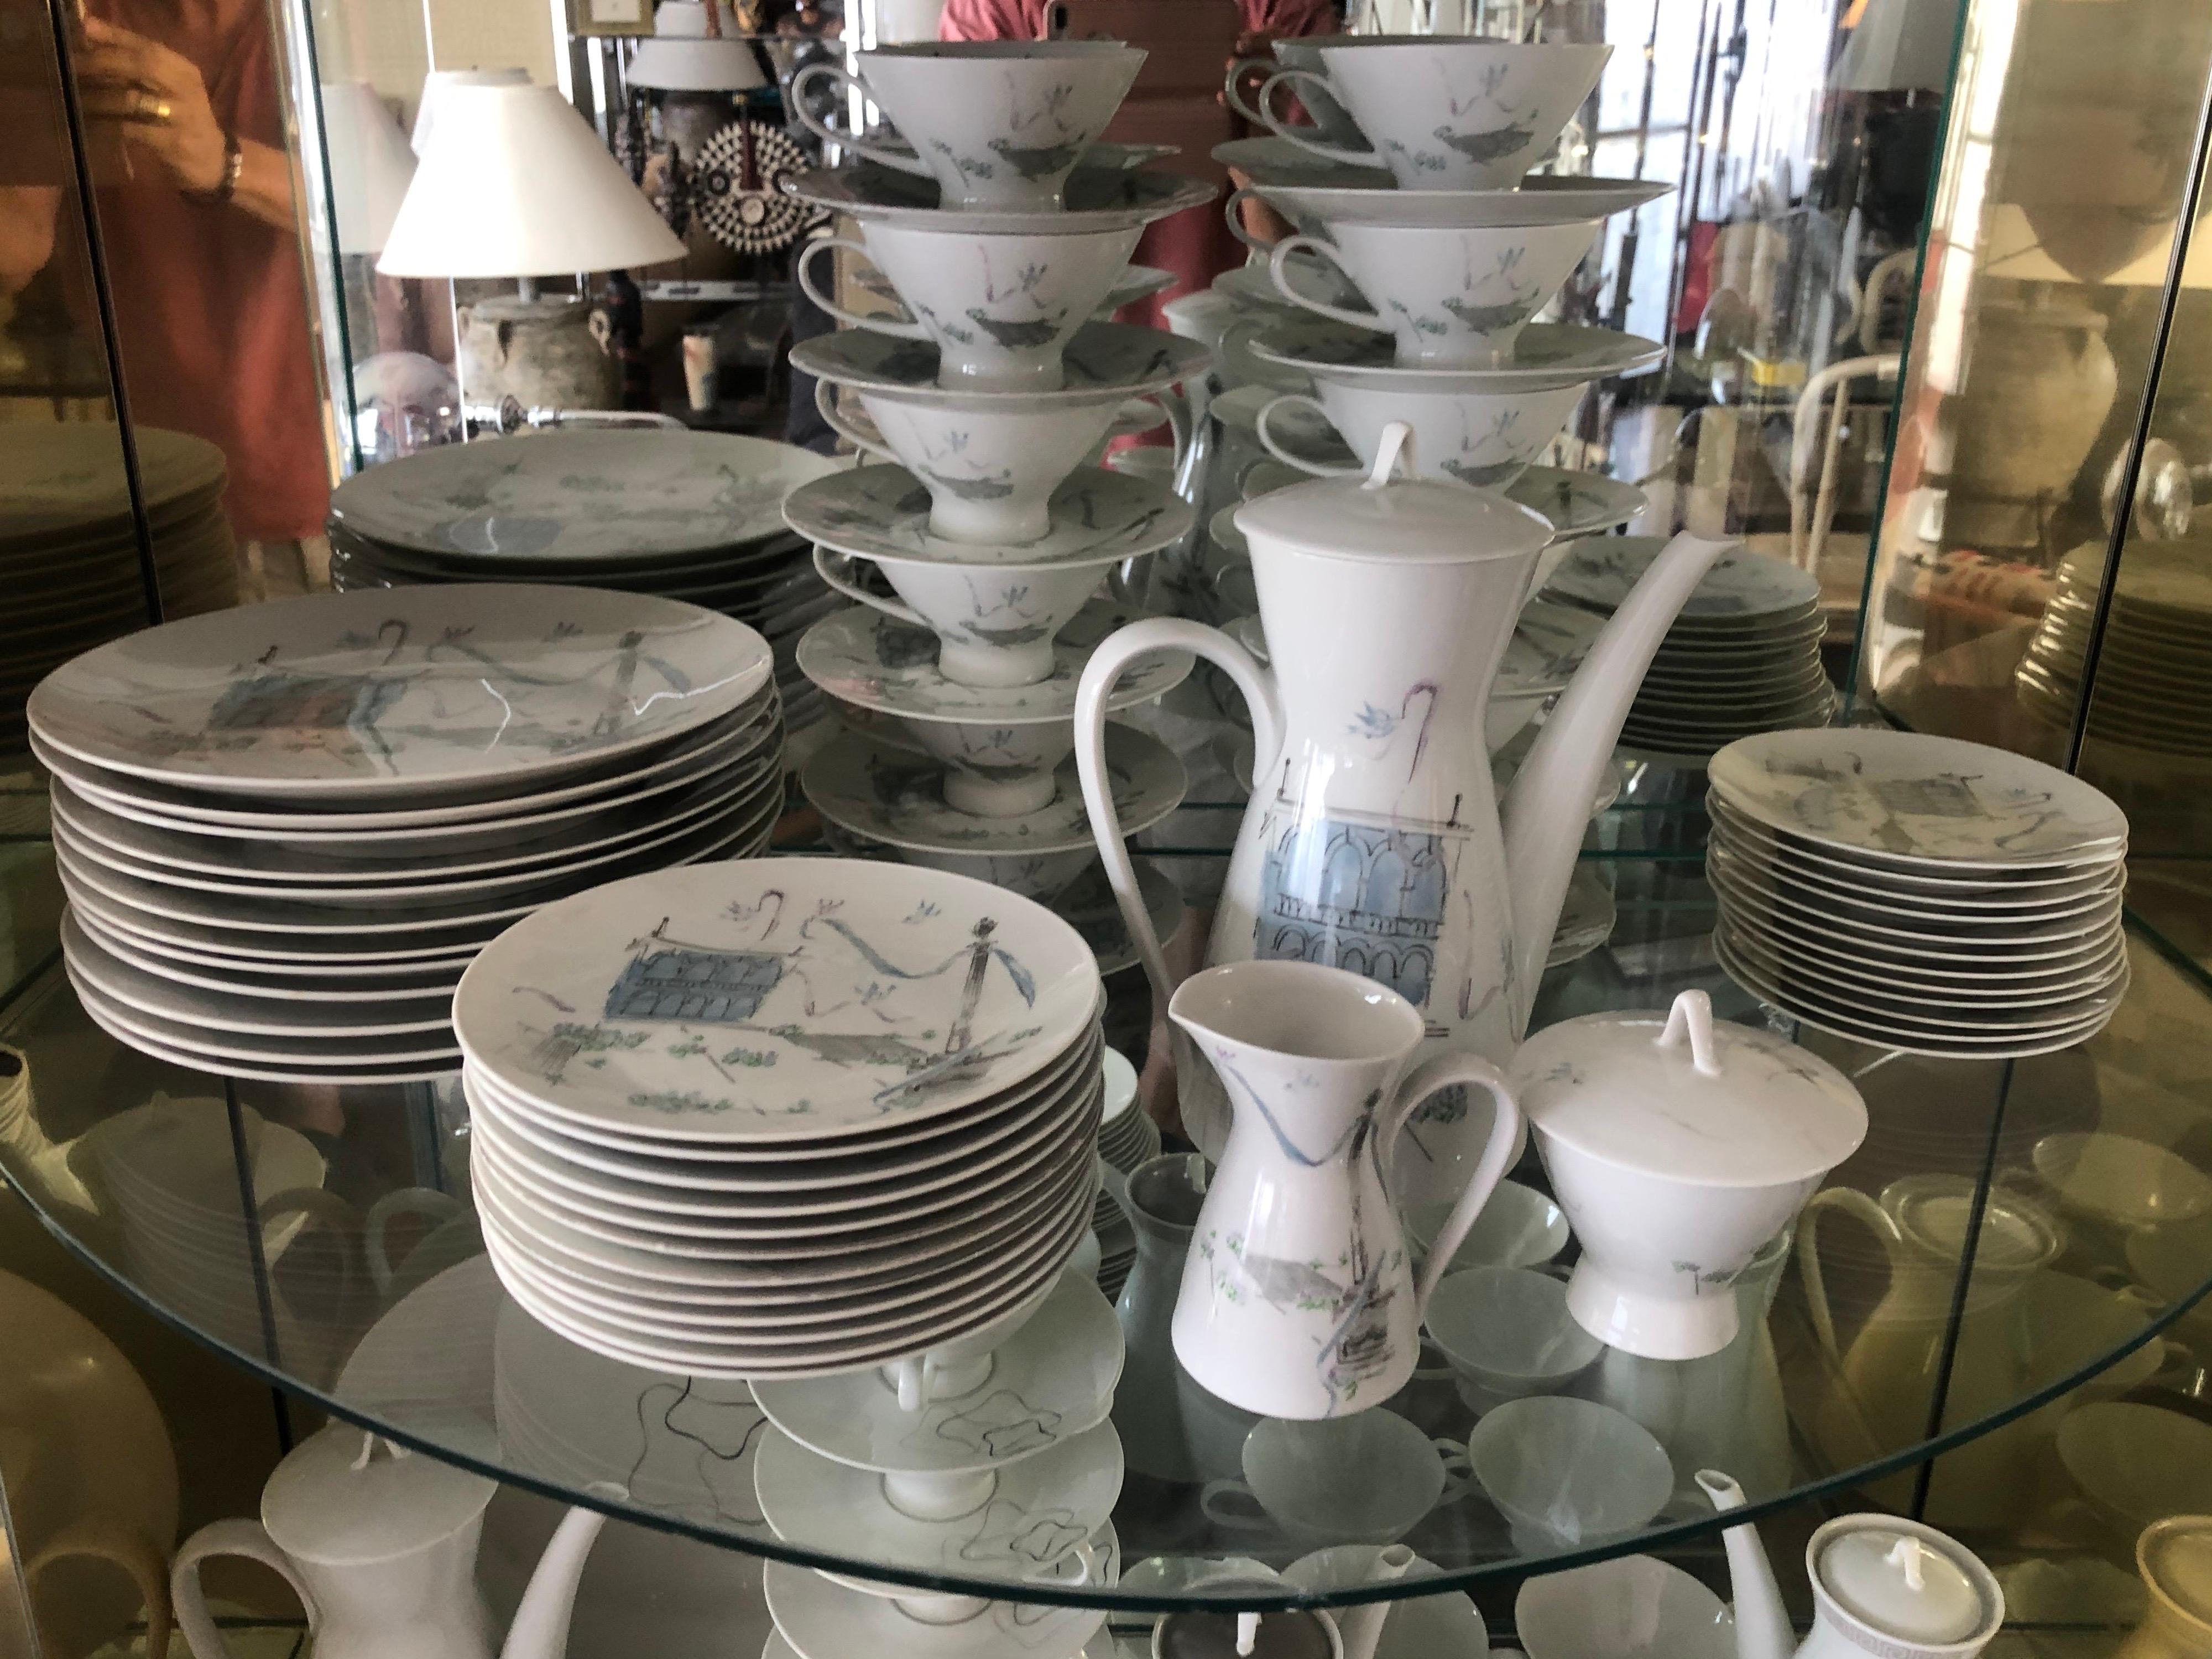 This Rosenthal set of China service for 12 plus accessory pieces was designed by the iconic midcentury designer Raymond Lowey. To get a highly desirable and highly collectible set in this condition is extremely rare. It is considered one of his most